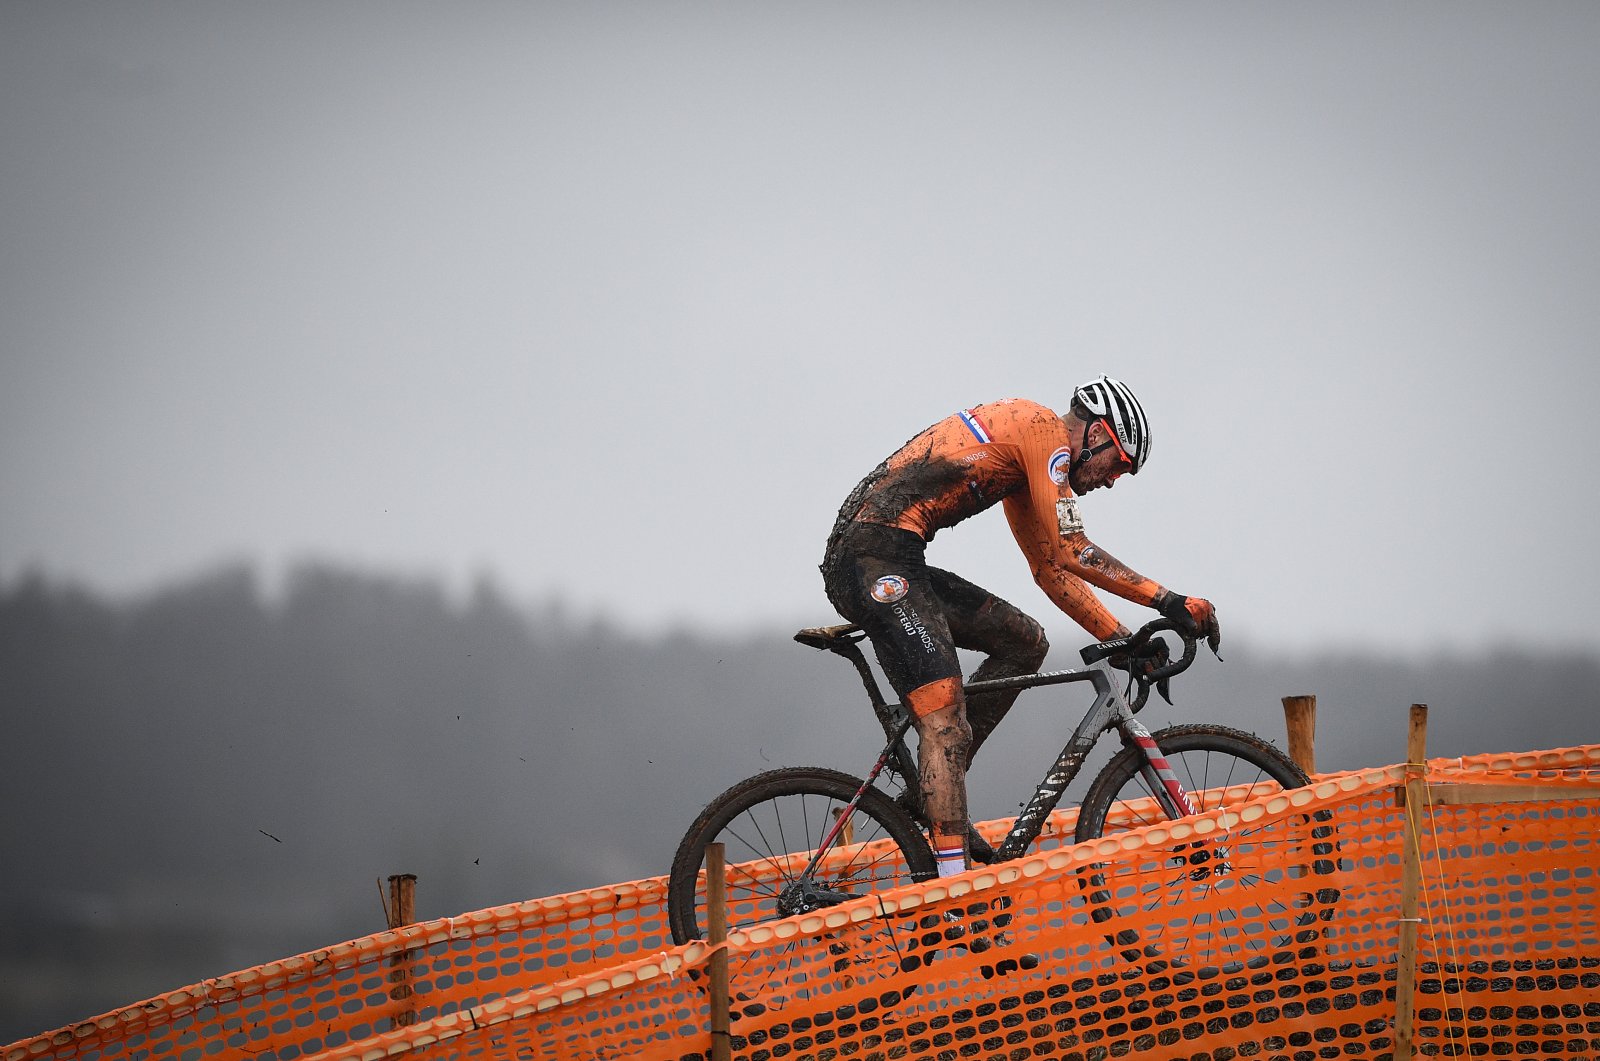 Mathieu Van Der Poel in action during the men's elite race at the World Championships cyclocross cycling in Dubendorf, Switzerland, Feb. 2, 2020. (Reuters Photo)